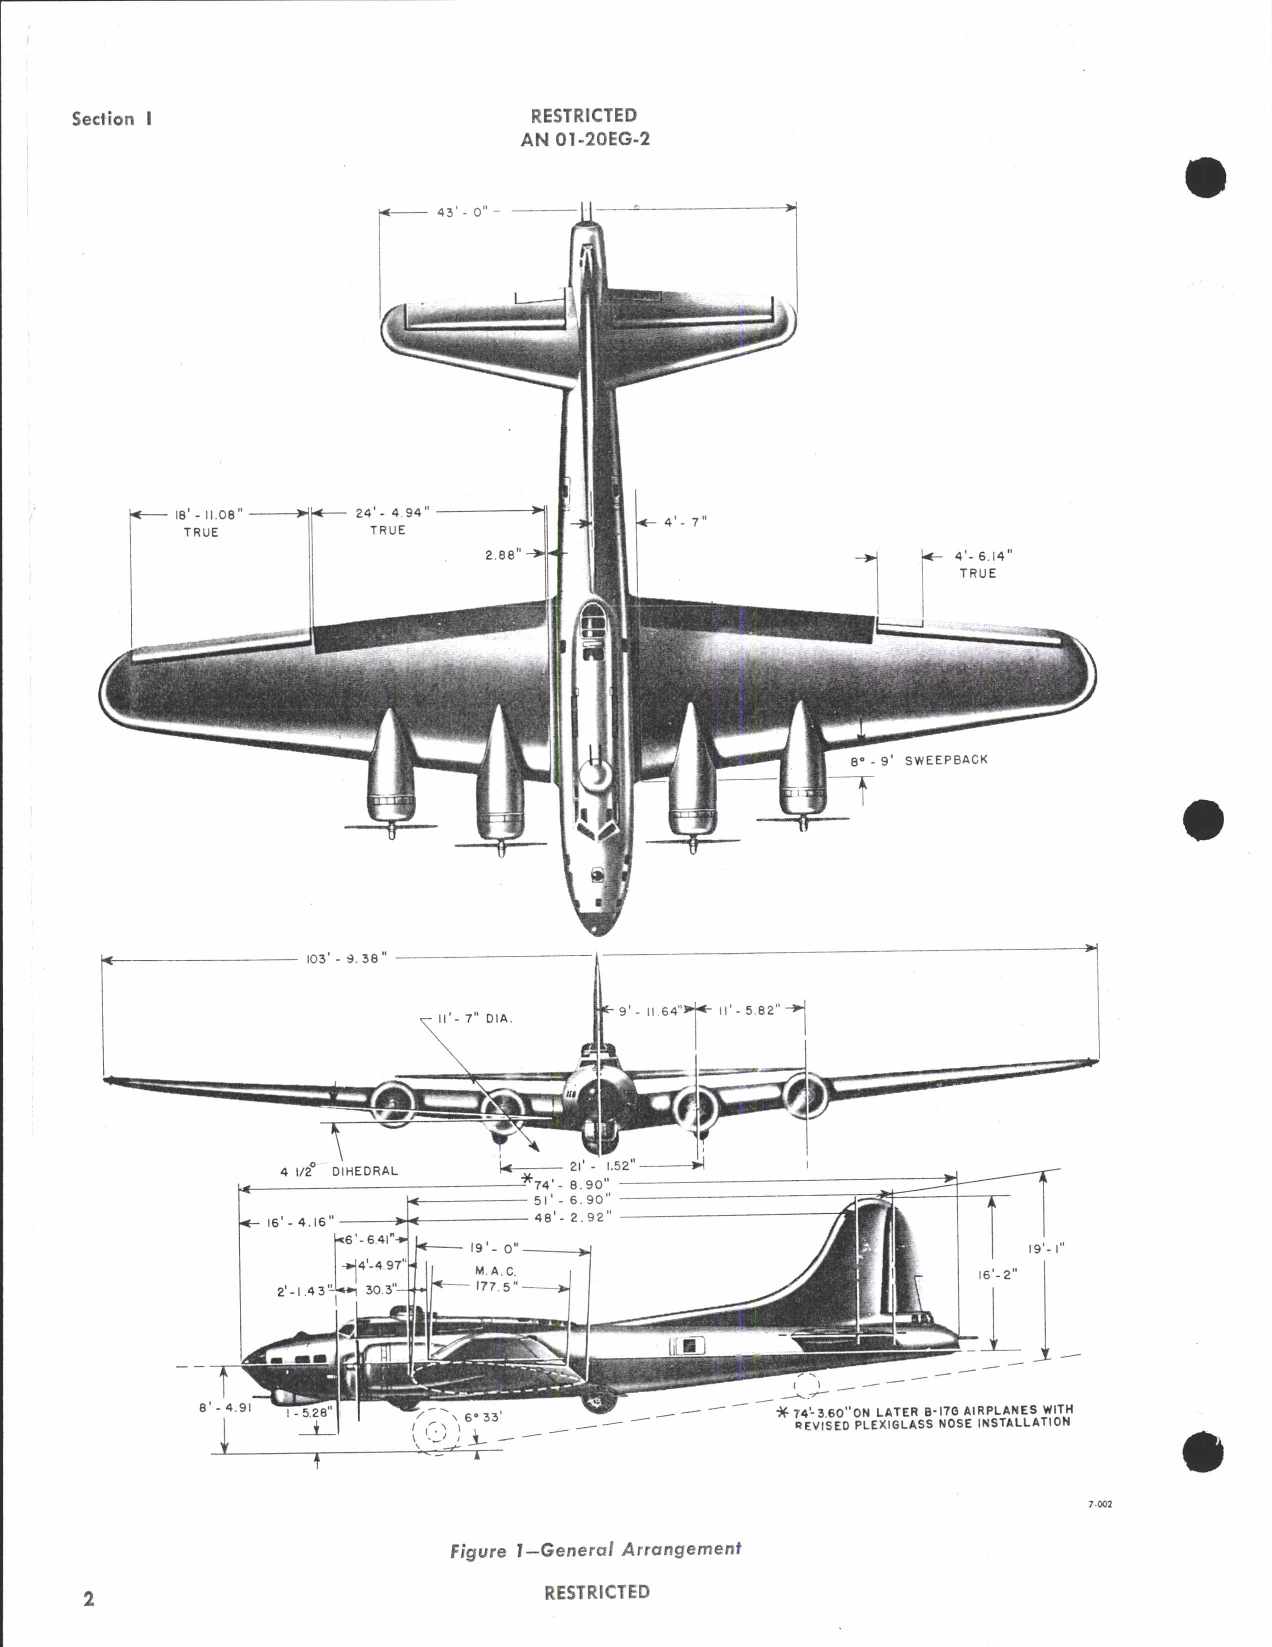 Sample page 8 from AirCorps Library document: Maintenance Instructions for B-17G Aircraft